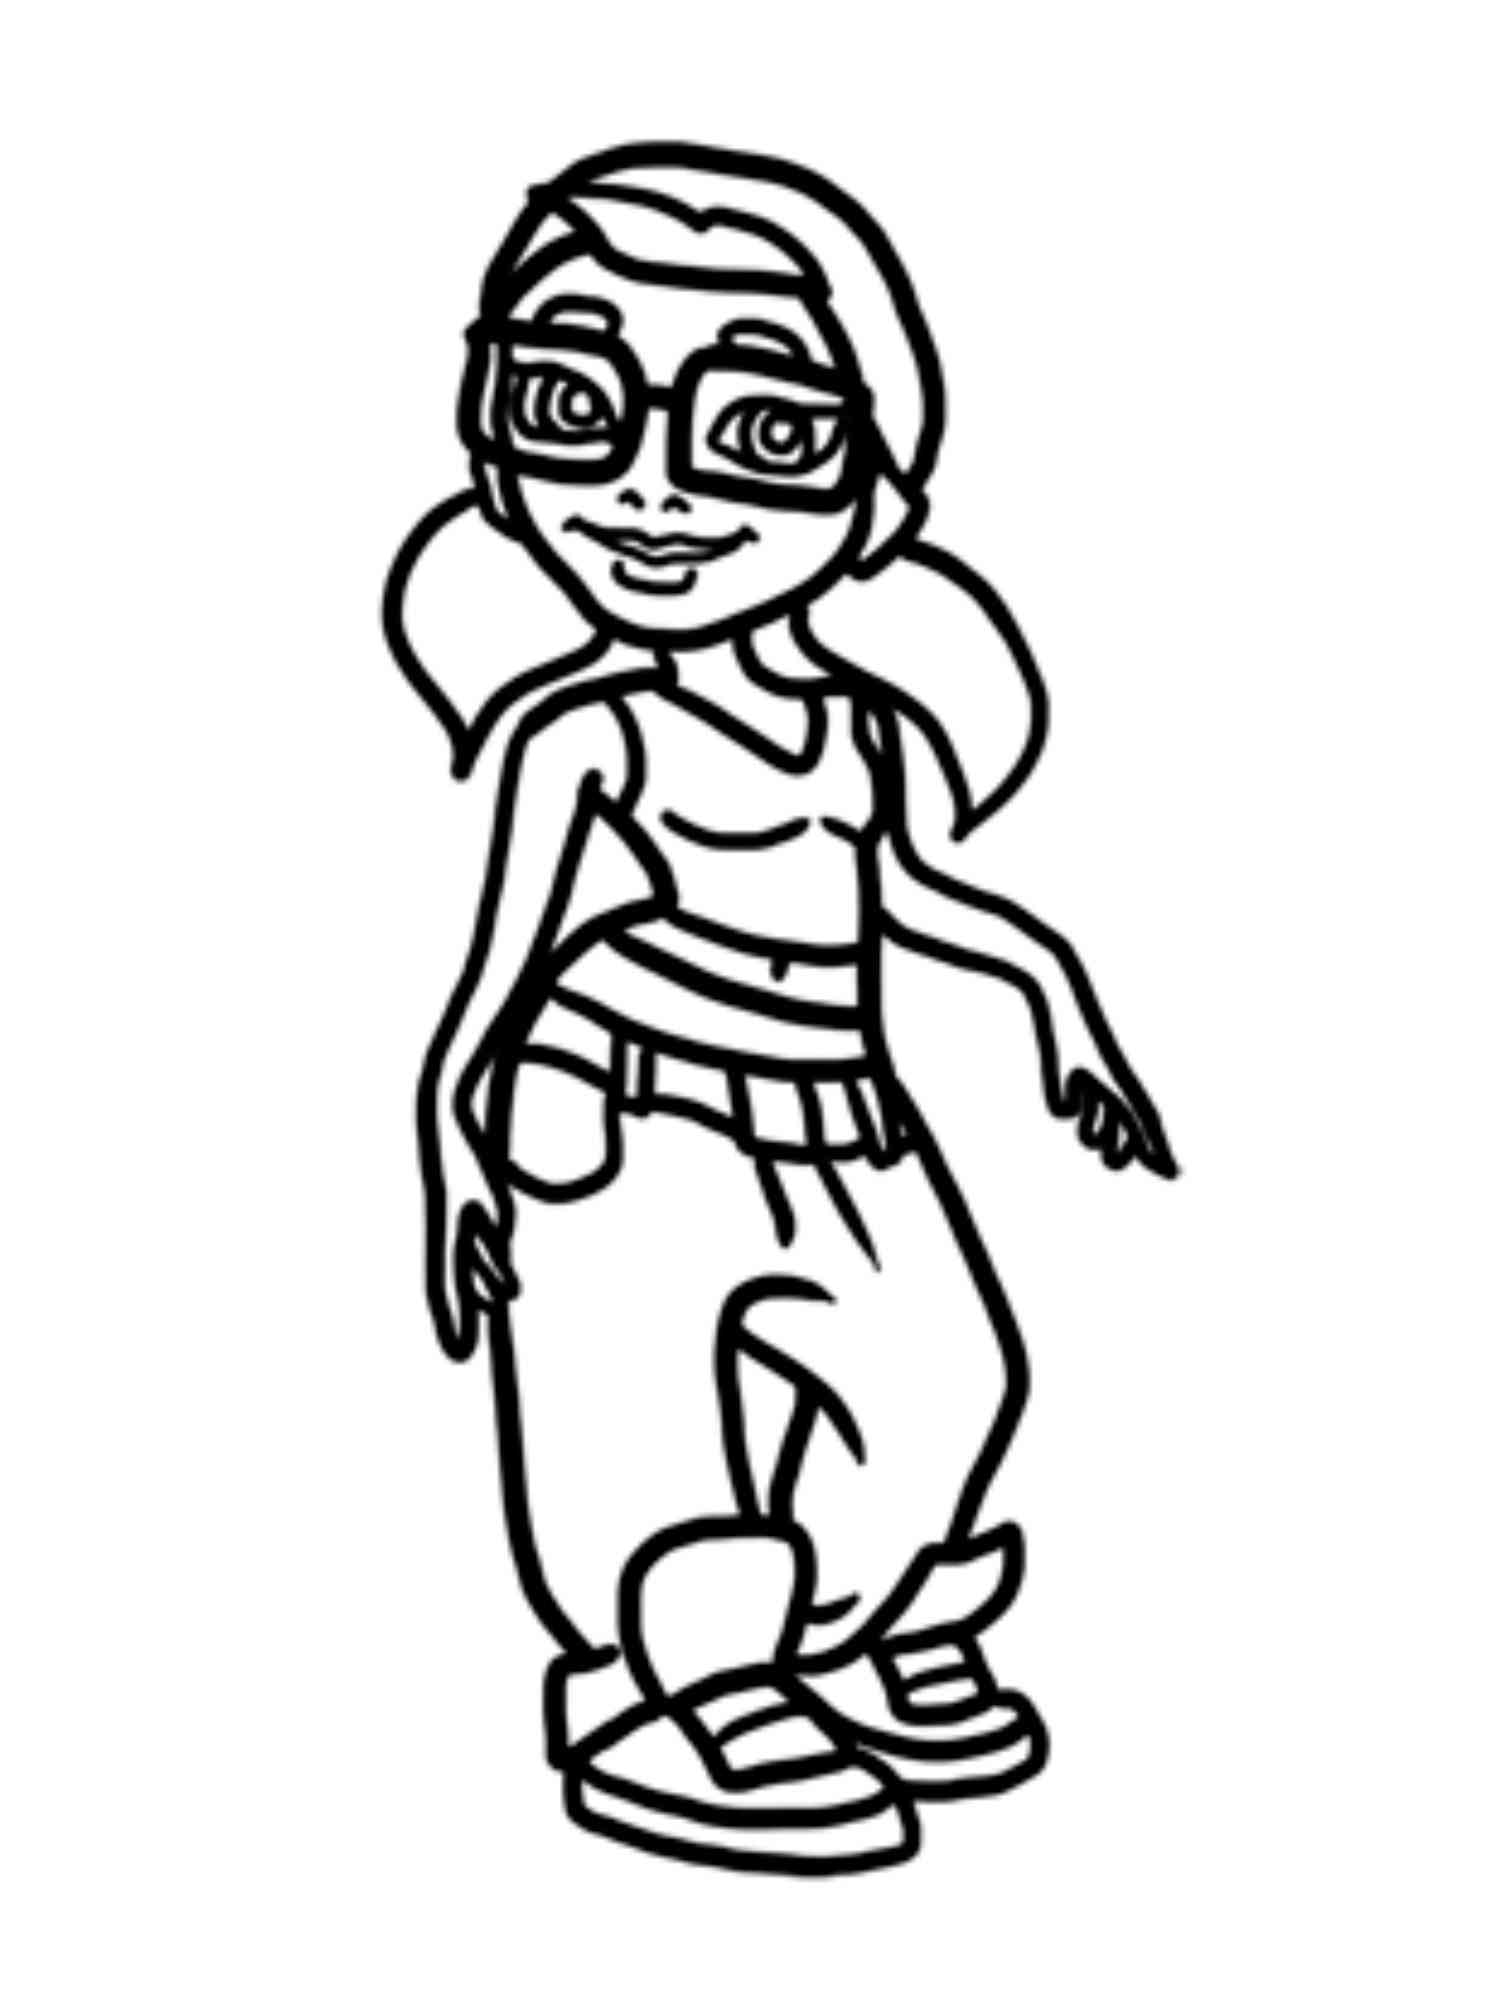 Tricky from Subway Surfers coloring page